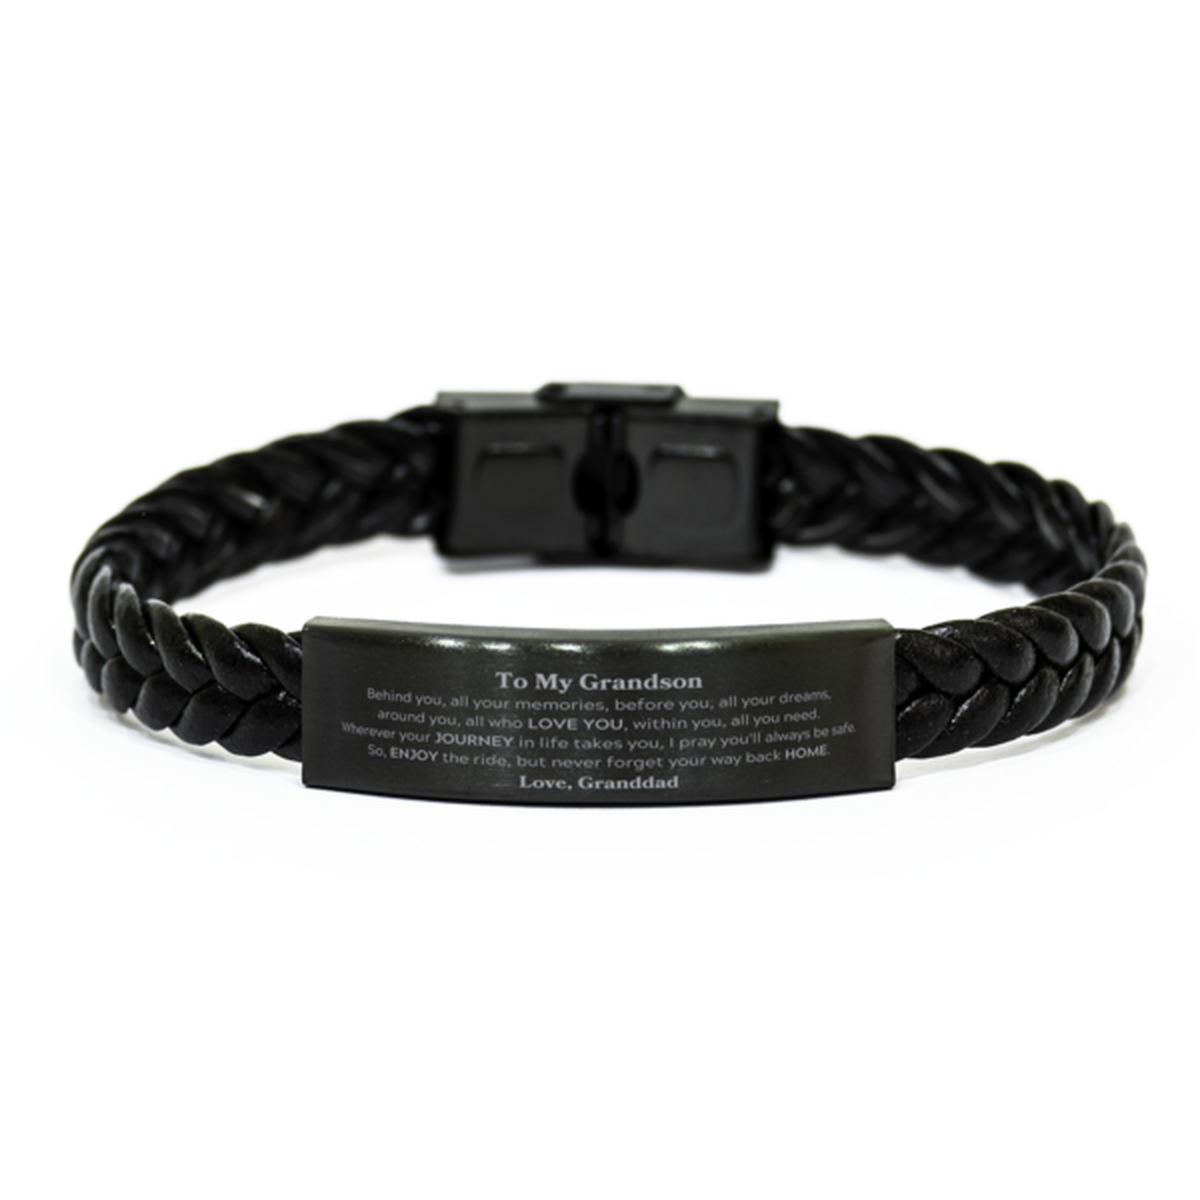 To My Grandson Graduation Gifts from Granddad, Grandson Braided Leather Bracelet Christmas Birthday Gifts for Grandson Behind you, all your memories, before you, all your dreams. Love, Granddad